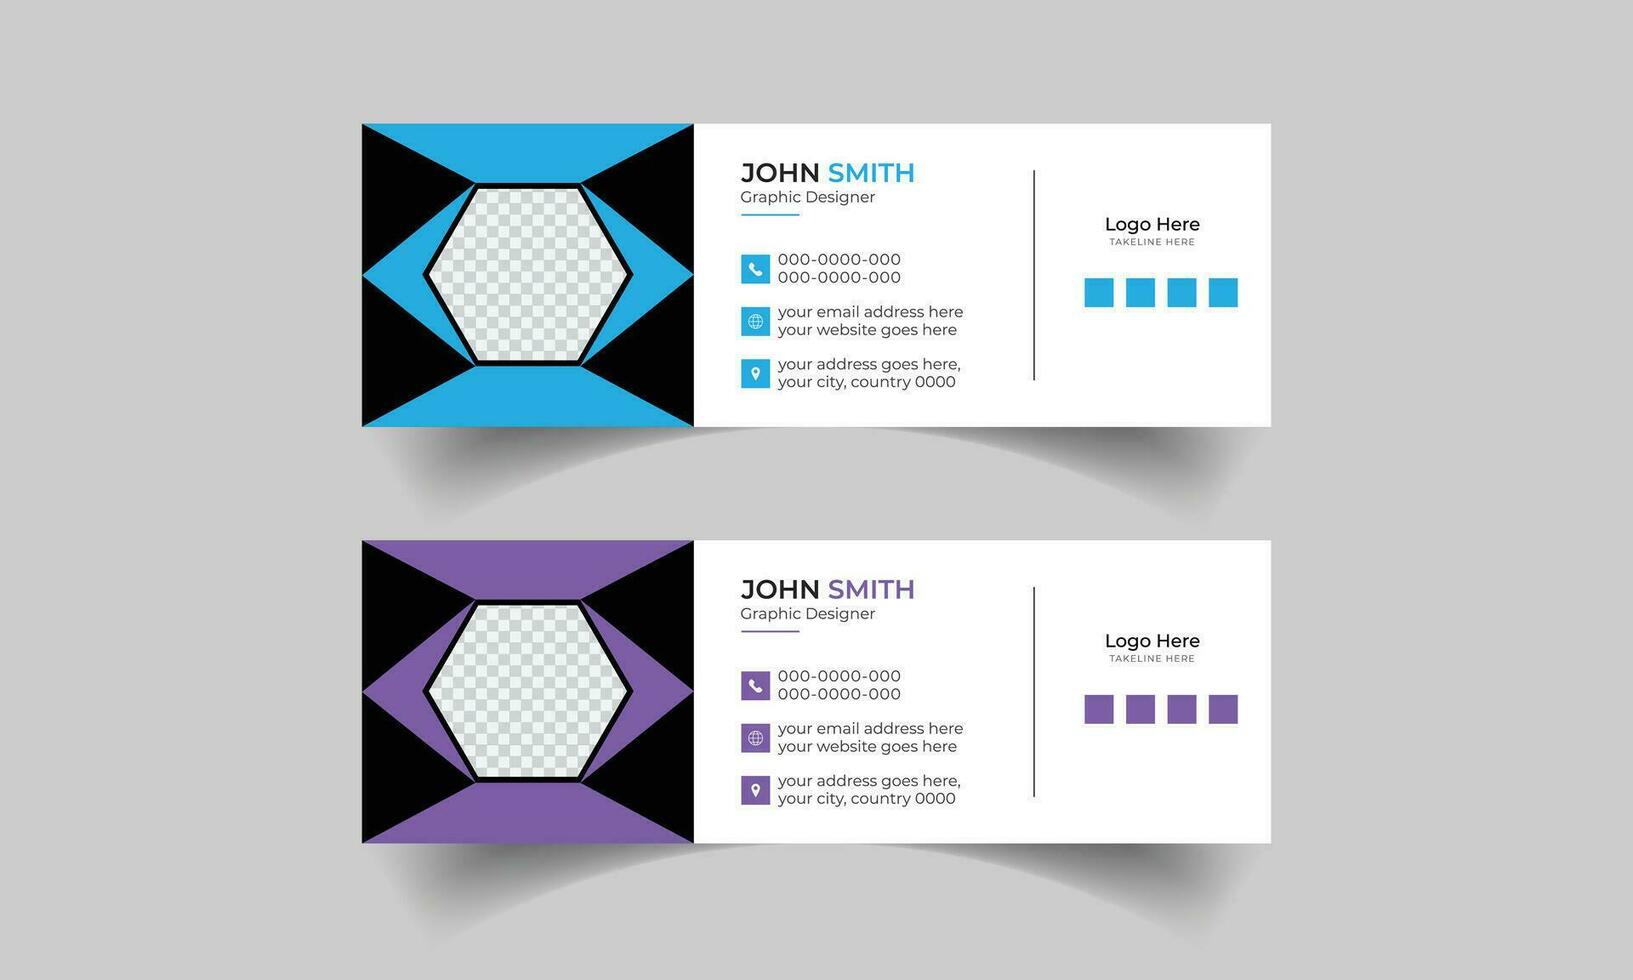 Template for colorful email signatures in vector form. Modern and minimalistic layout for a professional email signature.